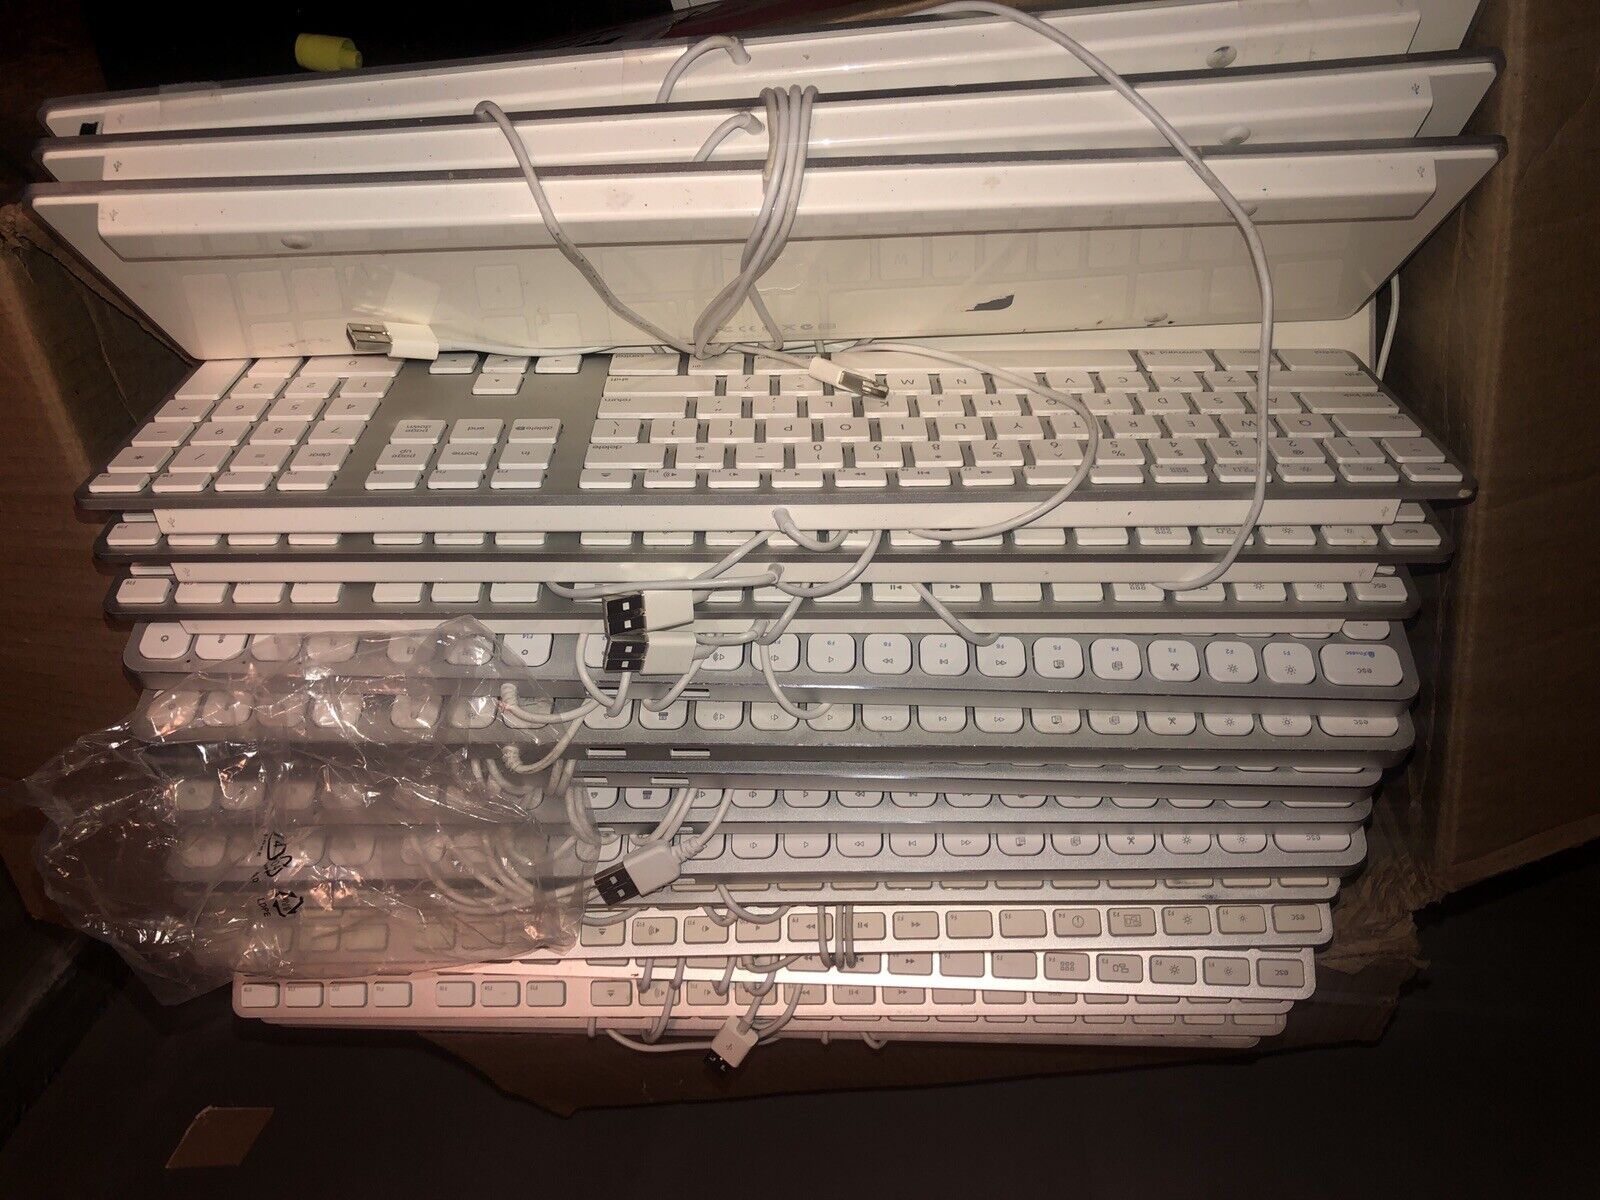 Massive Apple USB Wired Keyboard With Numeric Keypad - A1243 - Lot Of 20